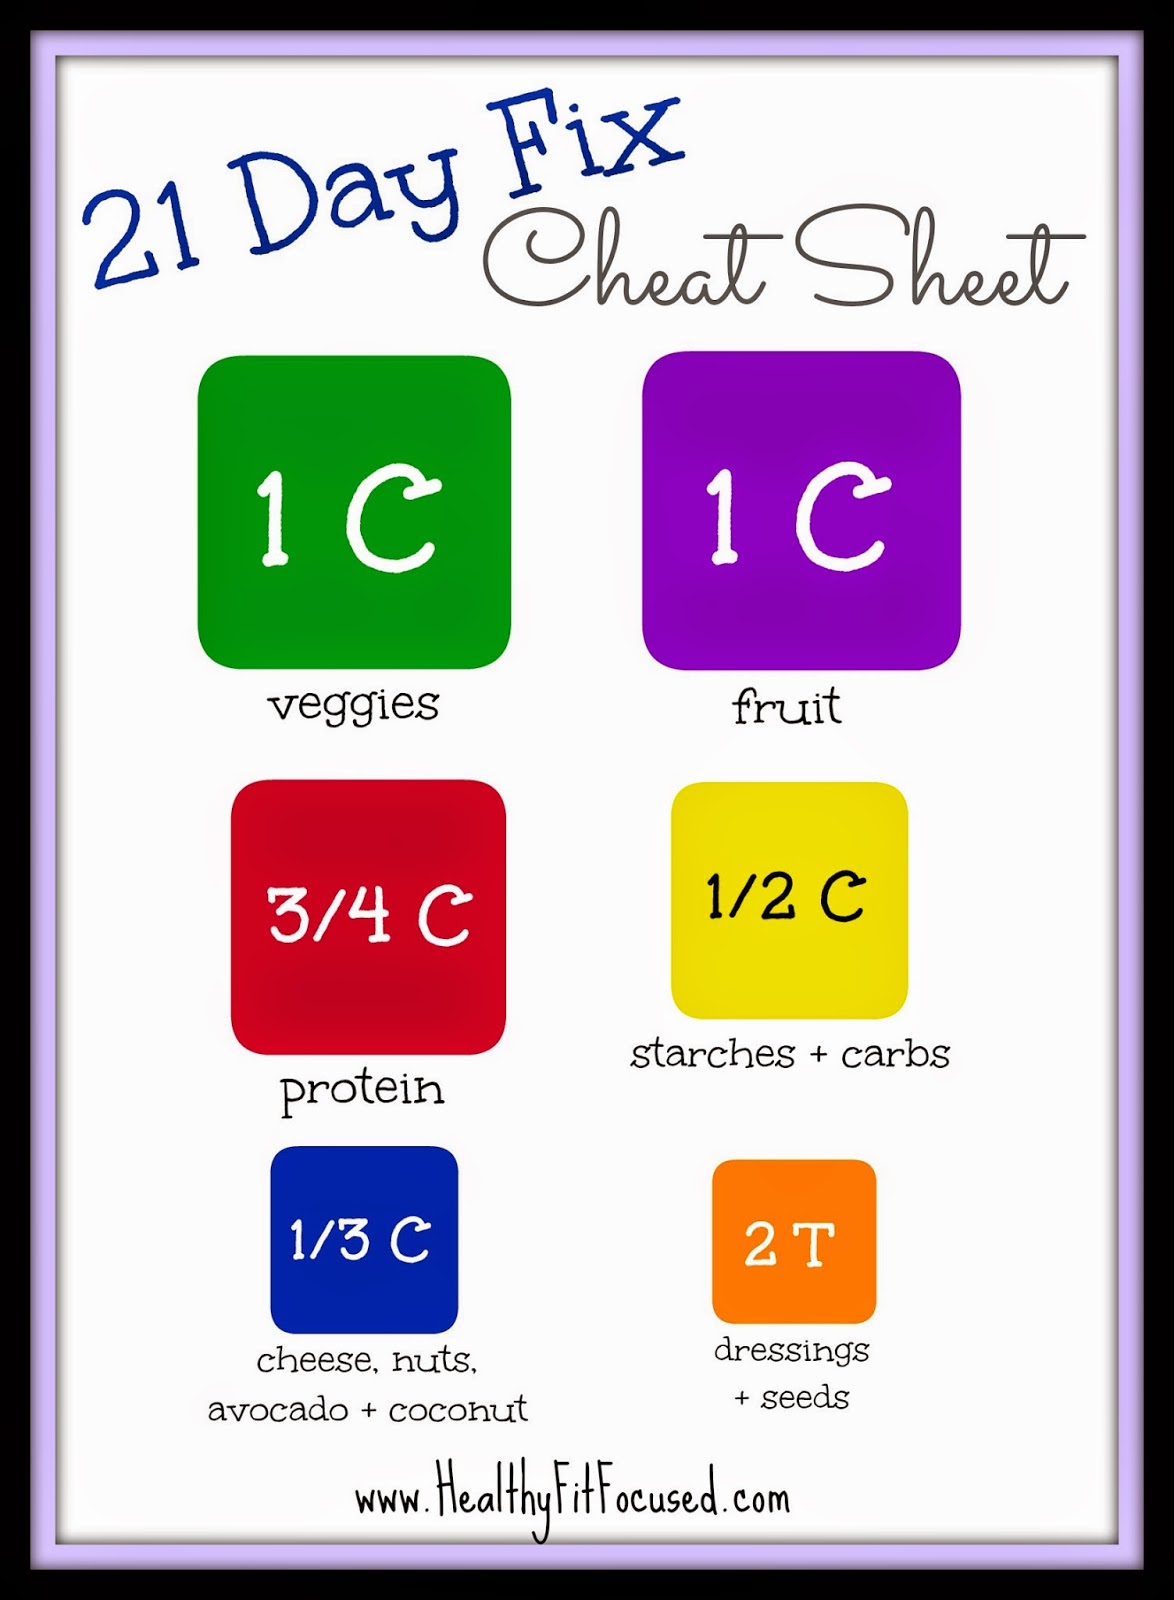 21 Day Fix Meal Breakdown, 21 Day Fix Cheat Sheet, 21 Day Fix Made Easy, 21 Day Fix container size